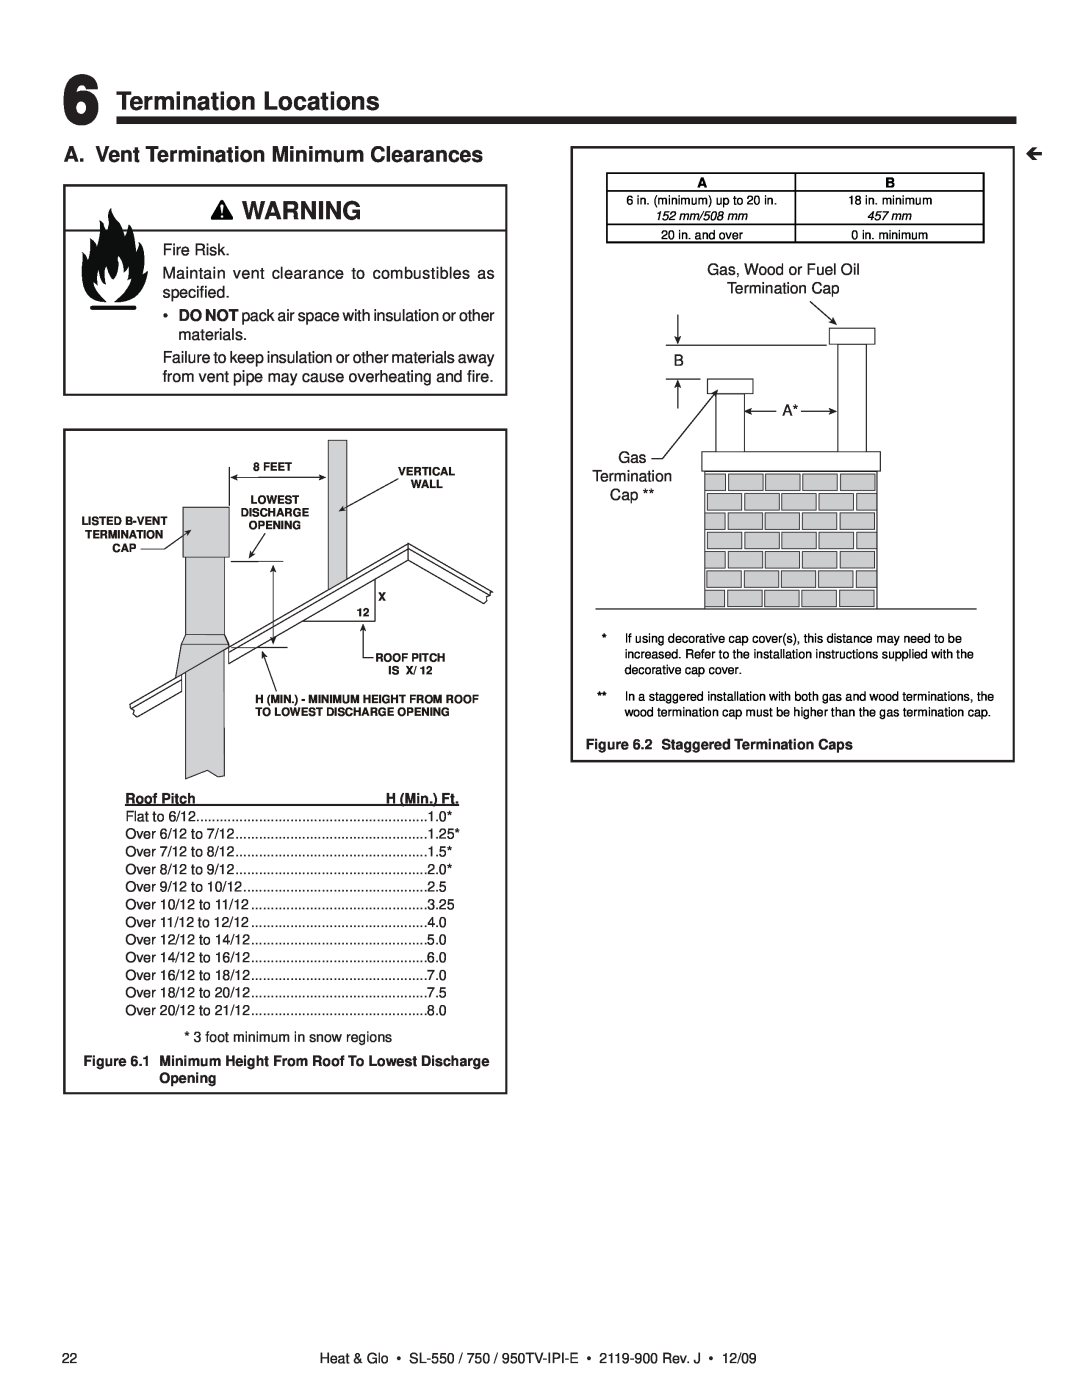 Heat & Glo LifeStyle SL-750TV-IPI-E owner manual Termination Locations, A. Vent Termination Minimum Clearances, Roof Pitch 